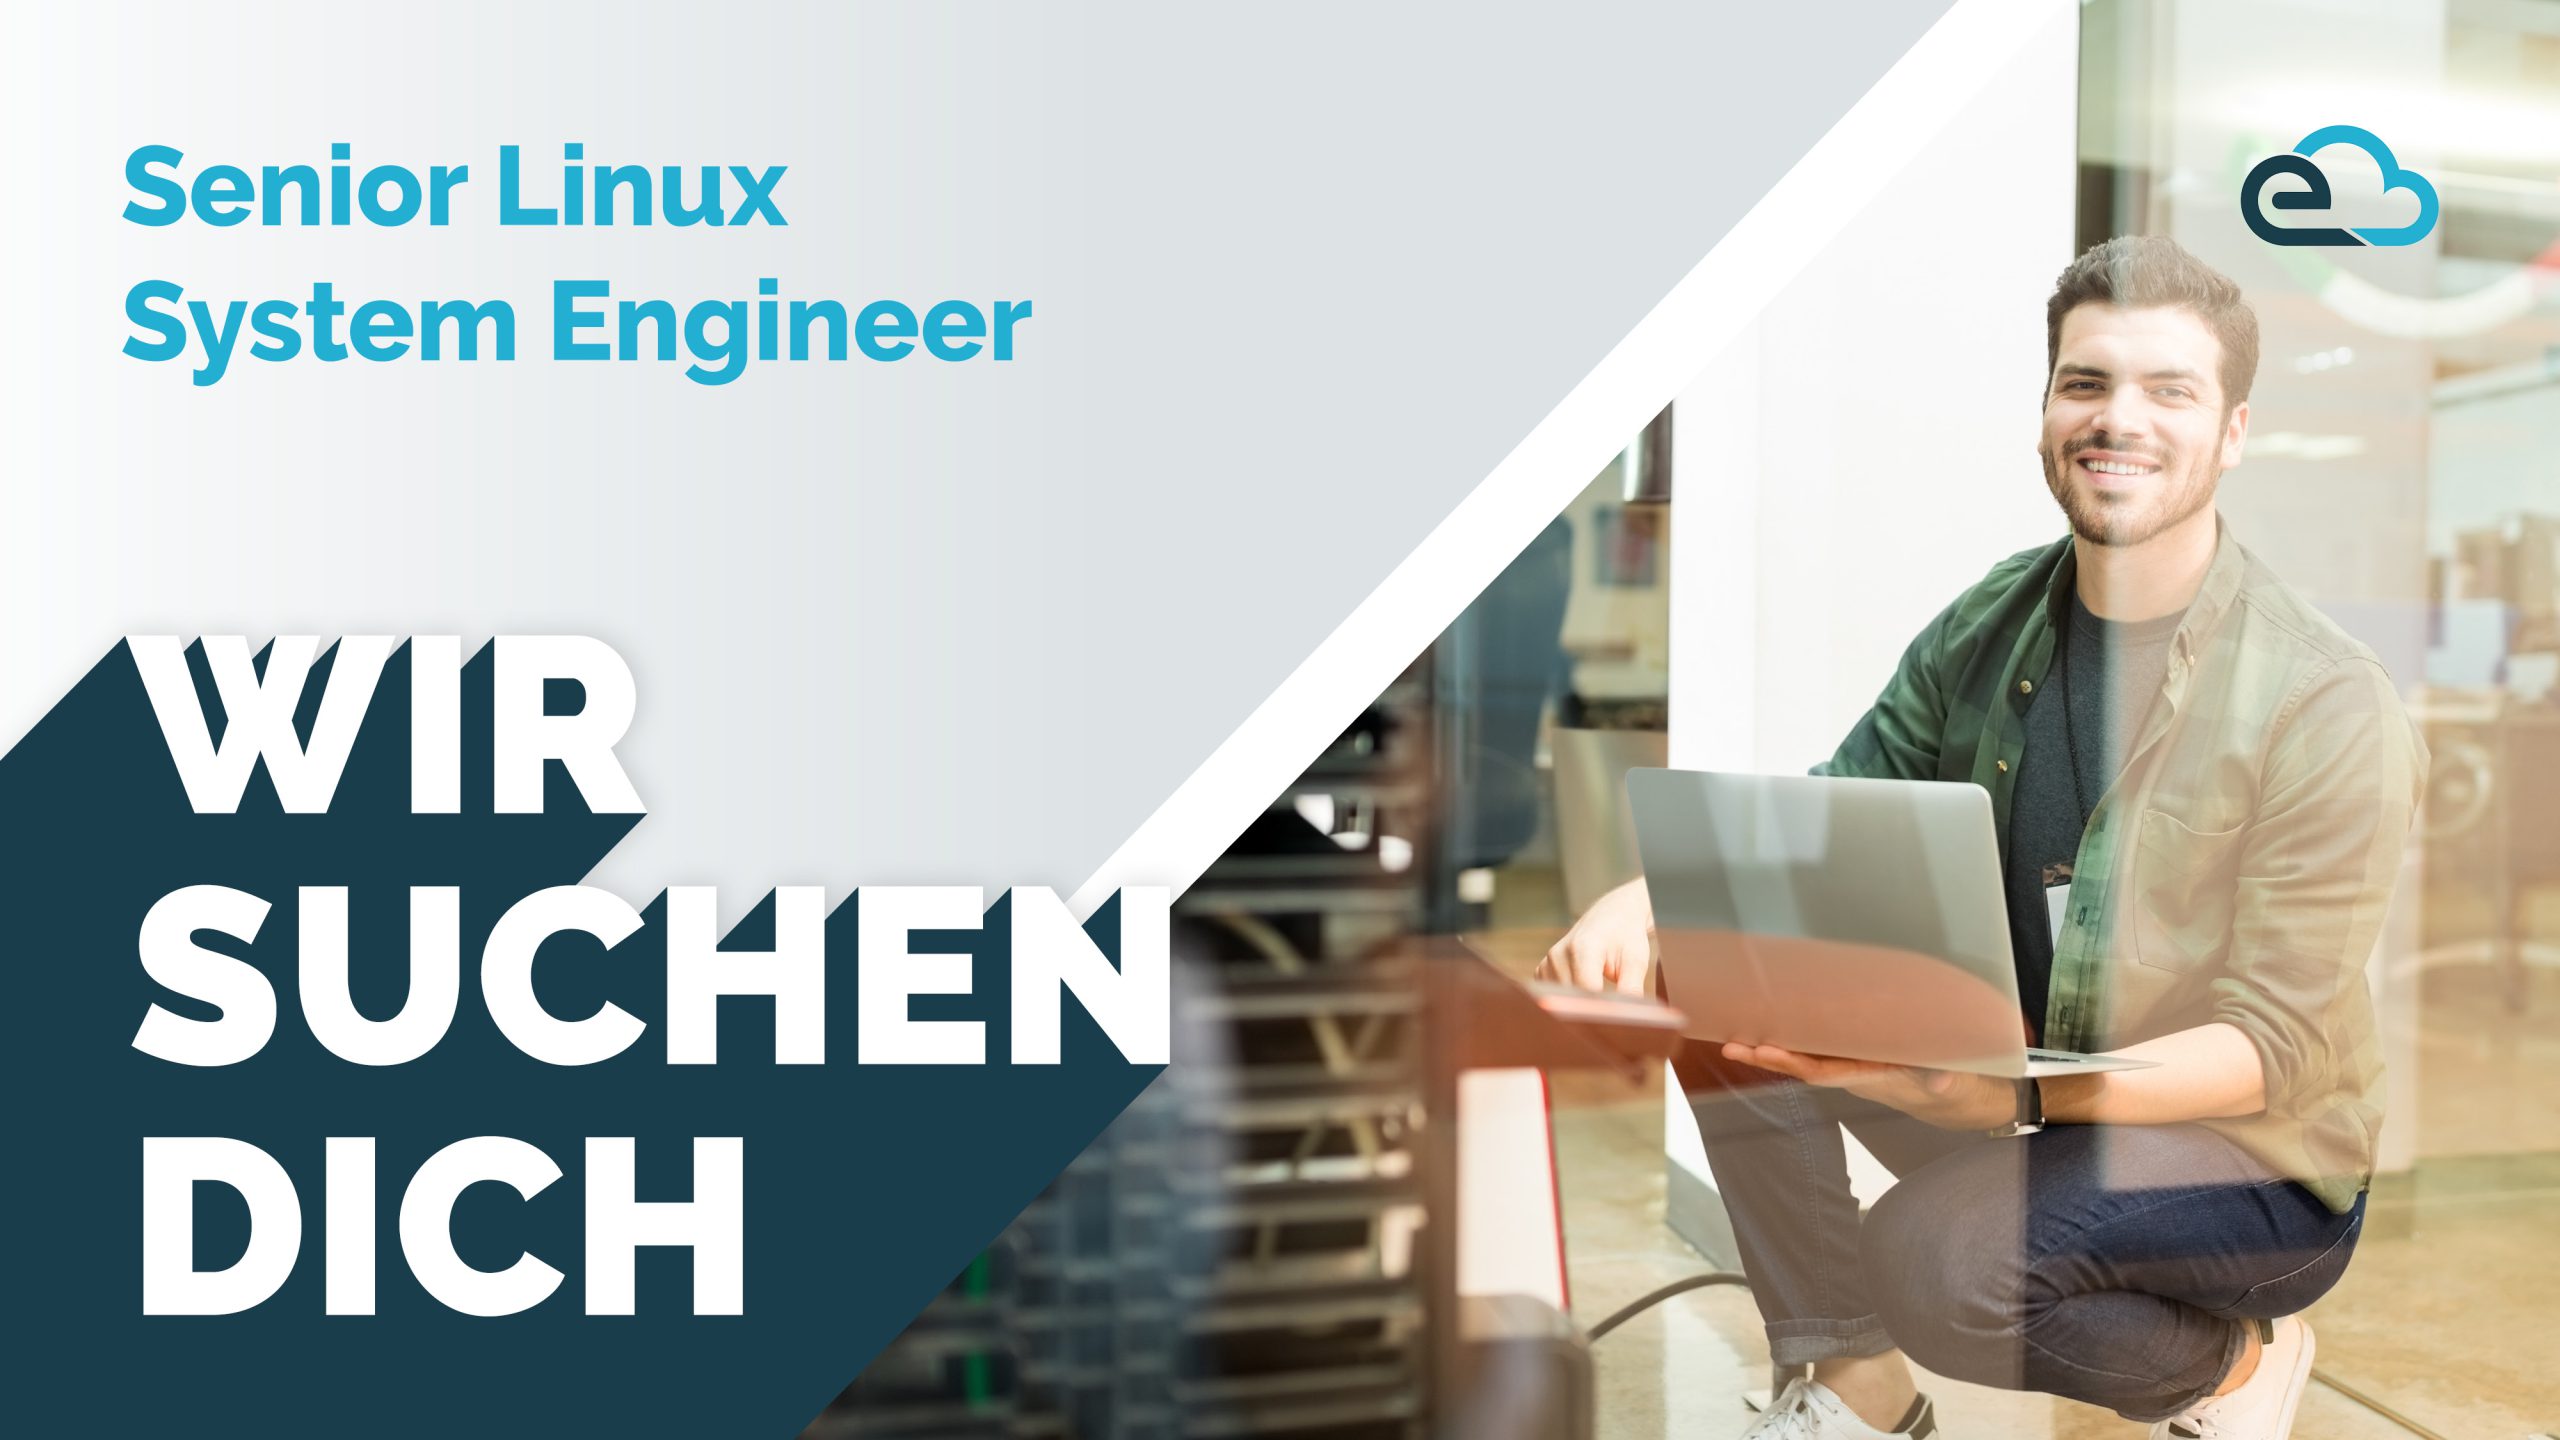 Linux System Engineer